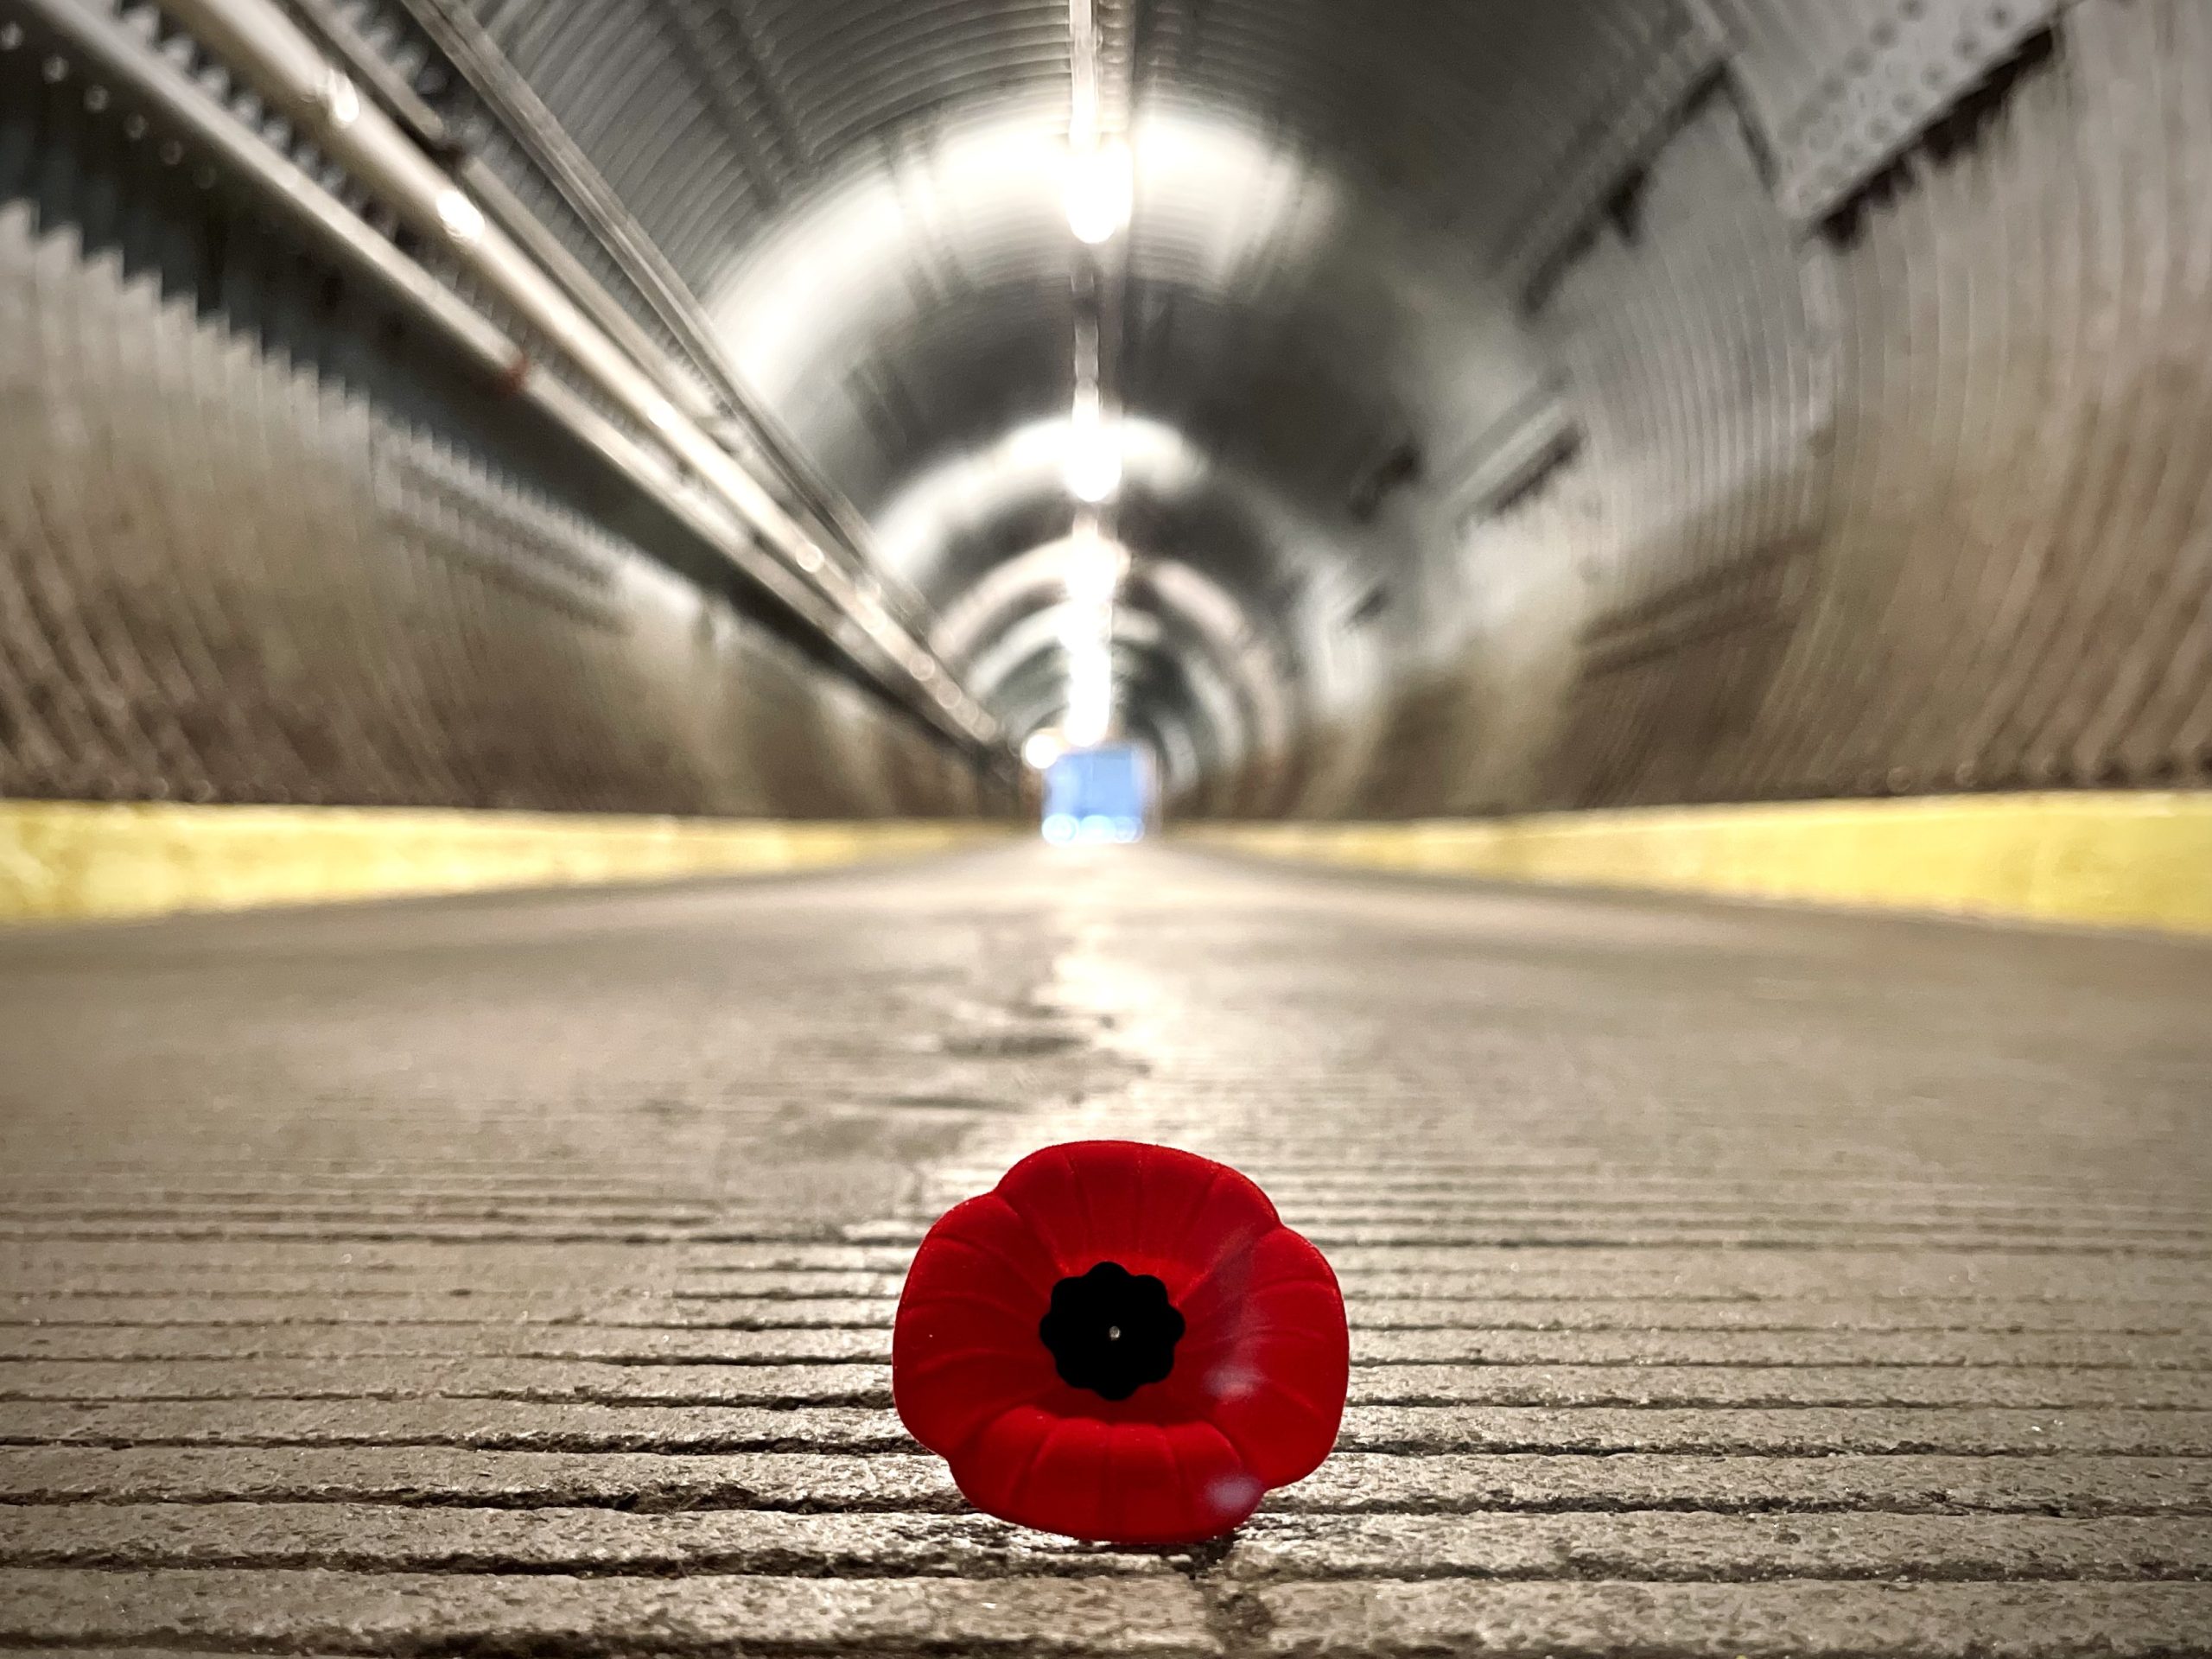 Poppy resting on the ground in the Diefenbunker's Blast Tunnel.